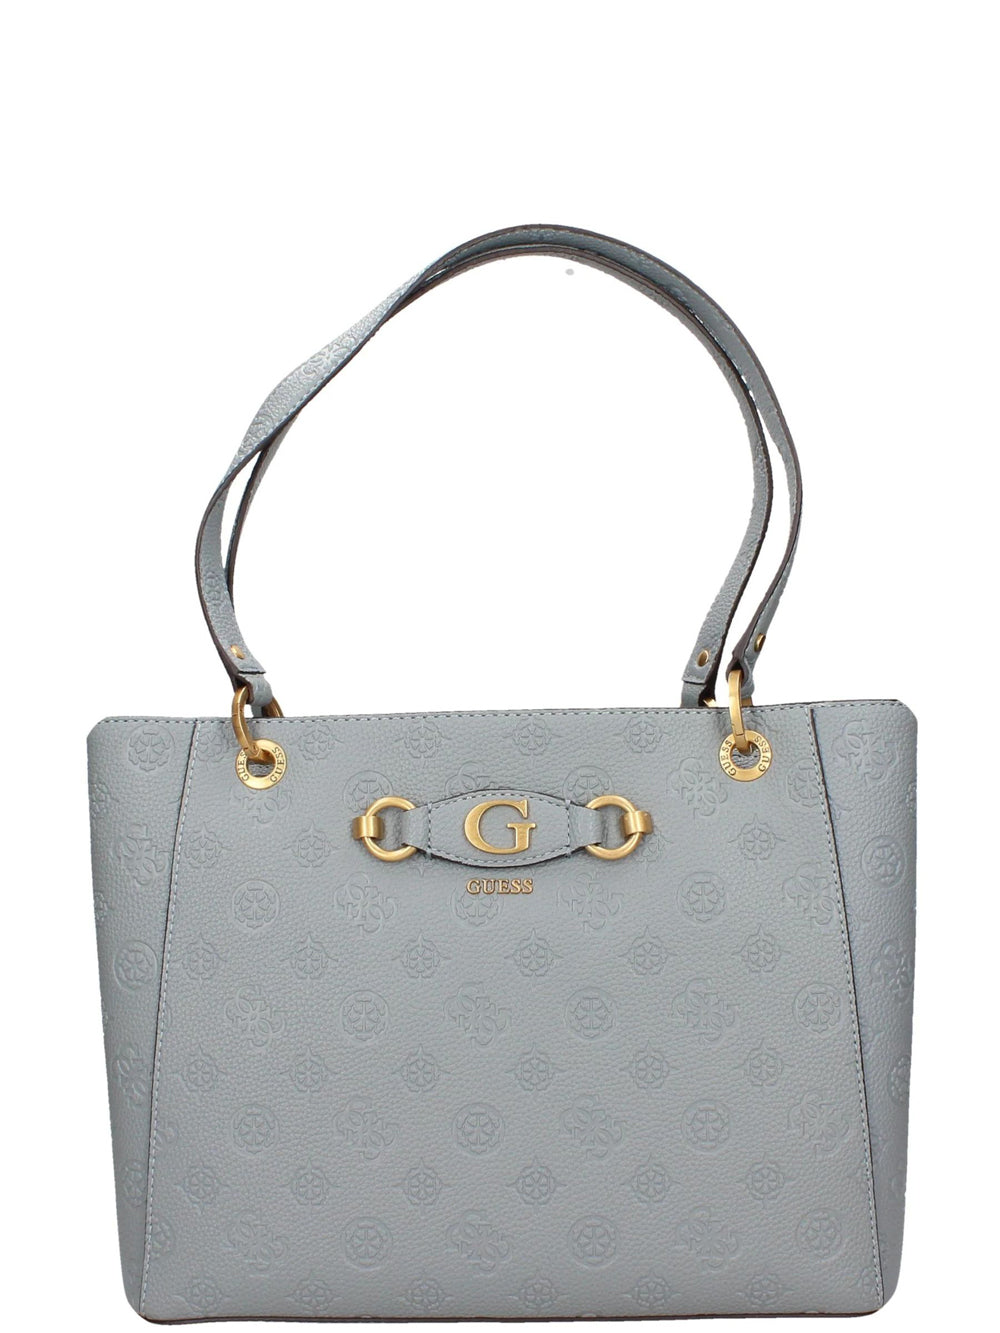 GUESS ACC D PRE Shopping bag tote Izzy peony noel